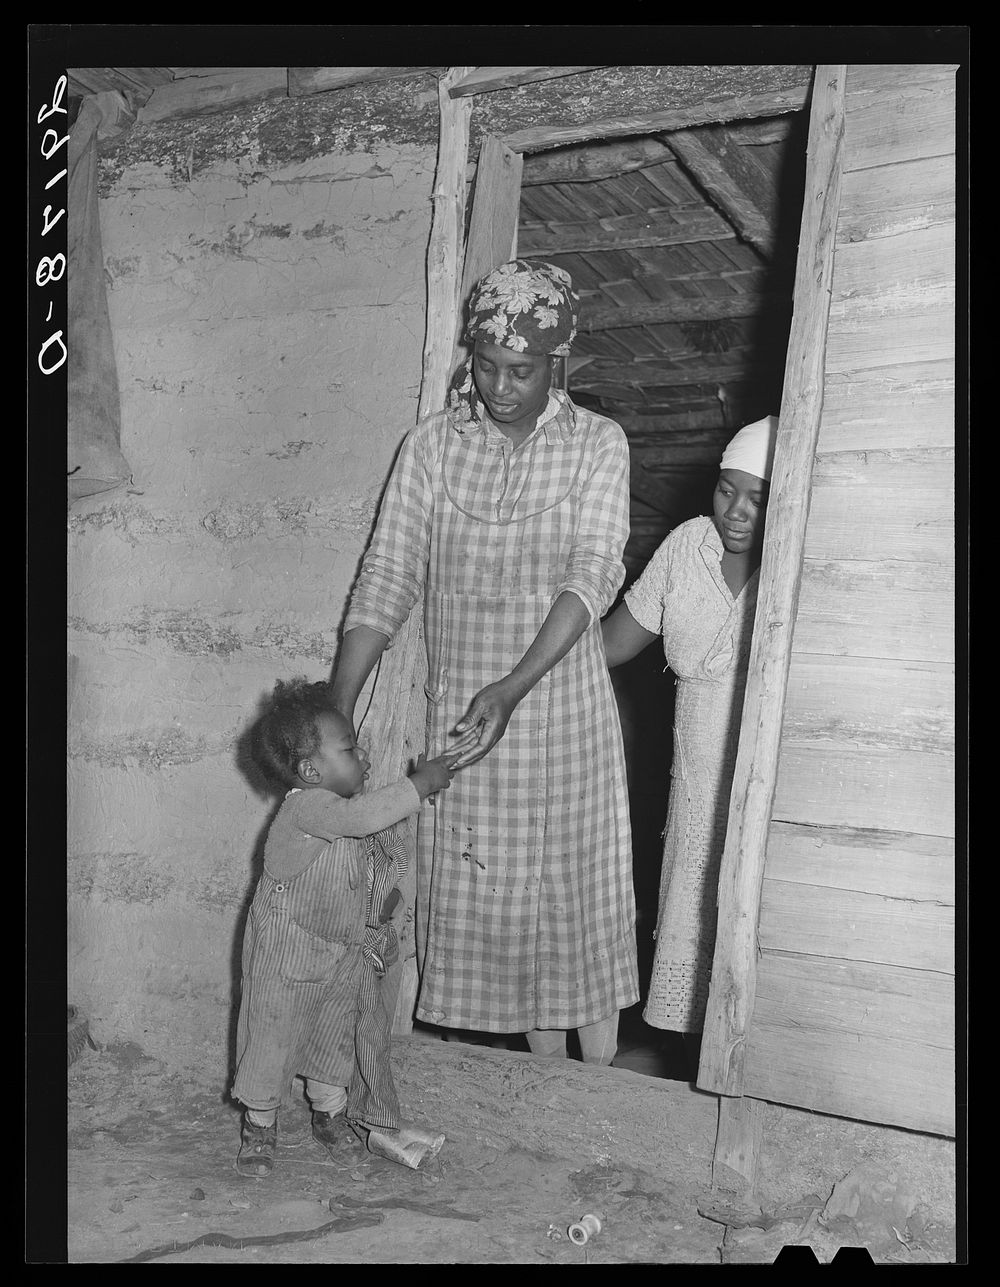 Wife and child of evicted sharecropper. Butler County, Missouri. Sourced from the Library of Congress.